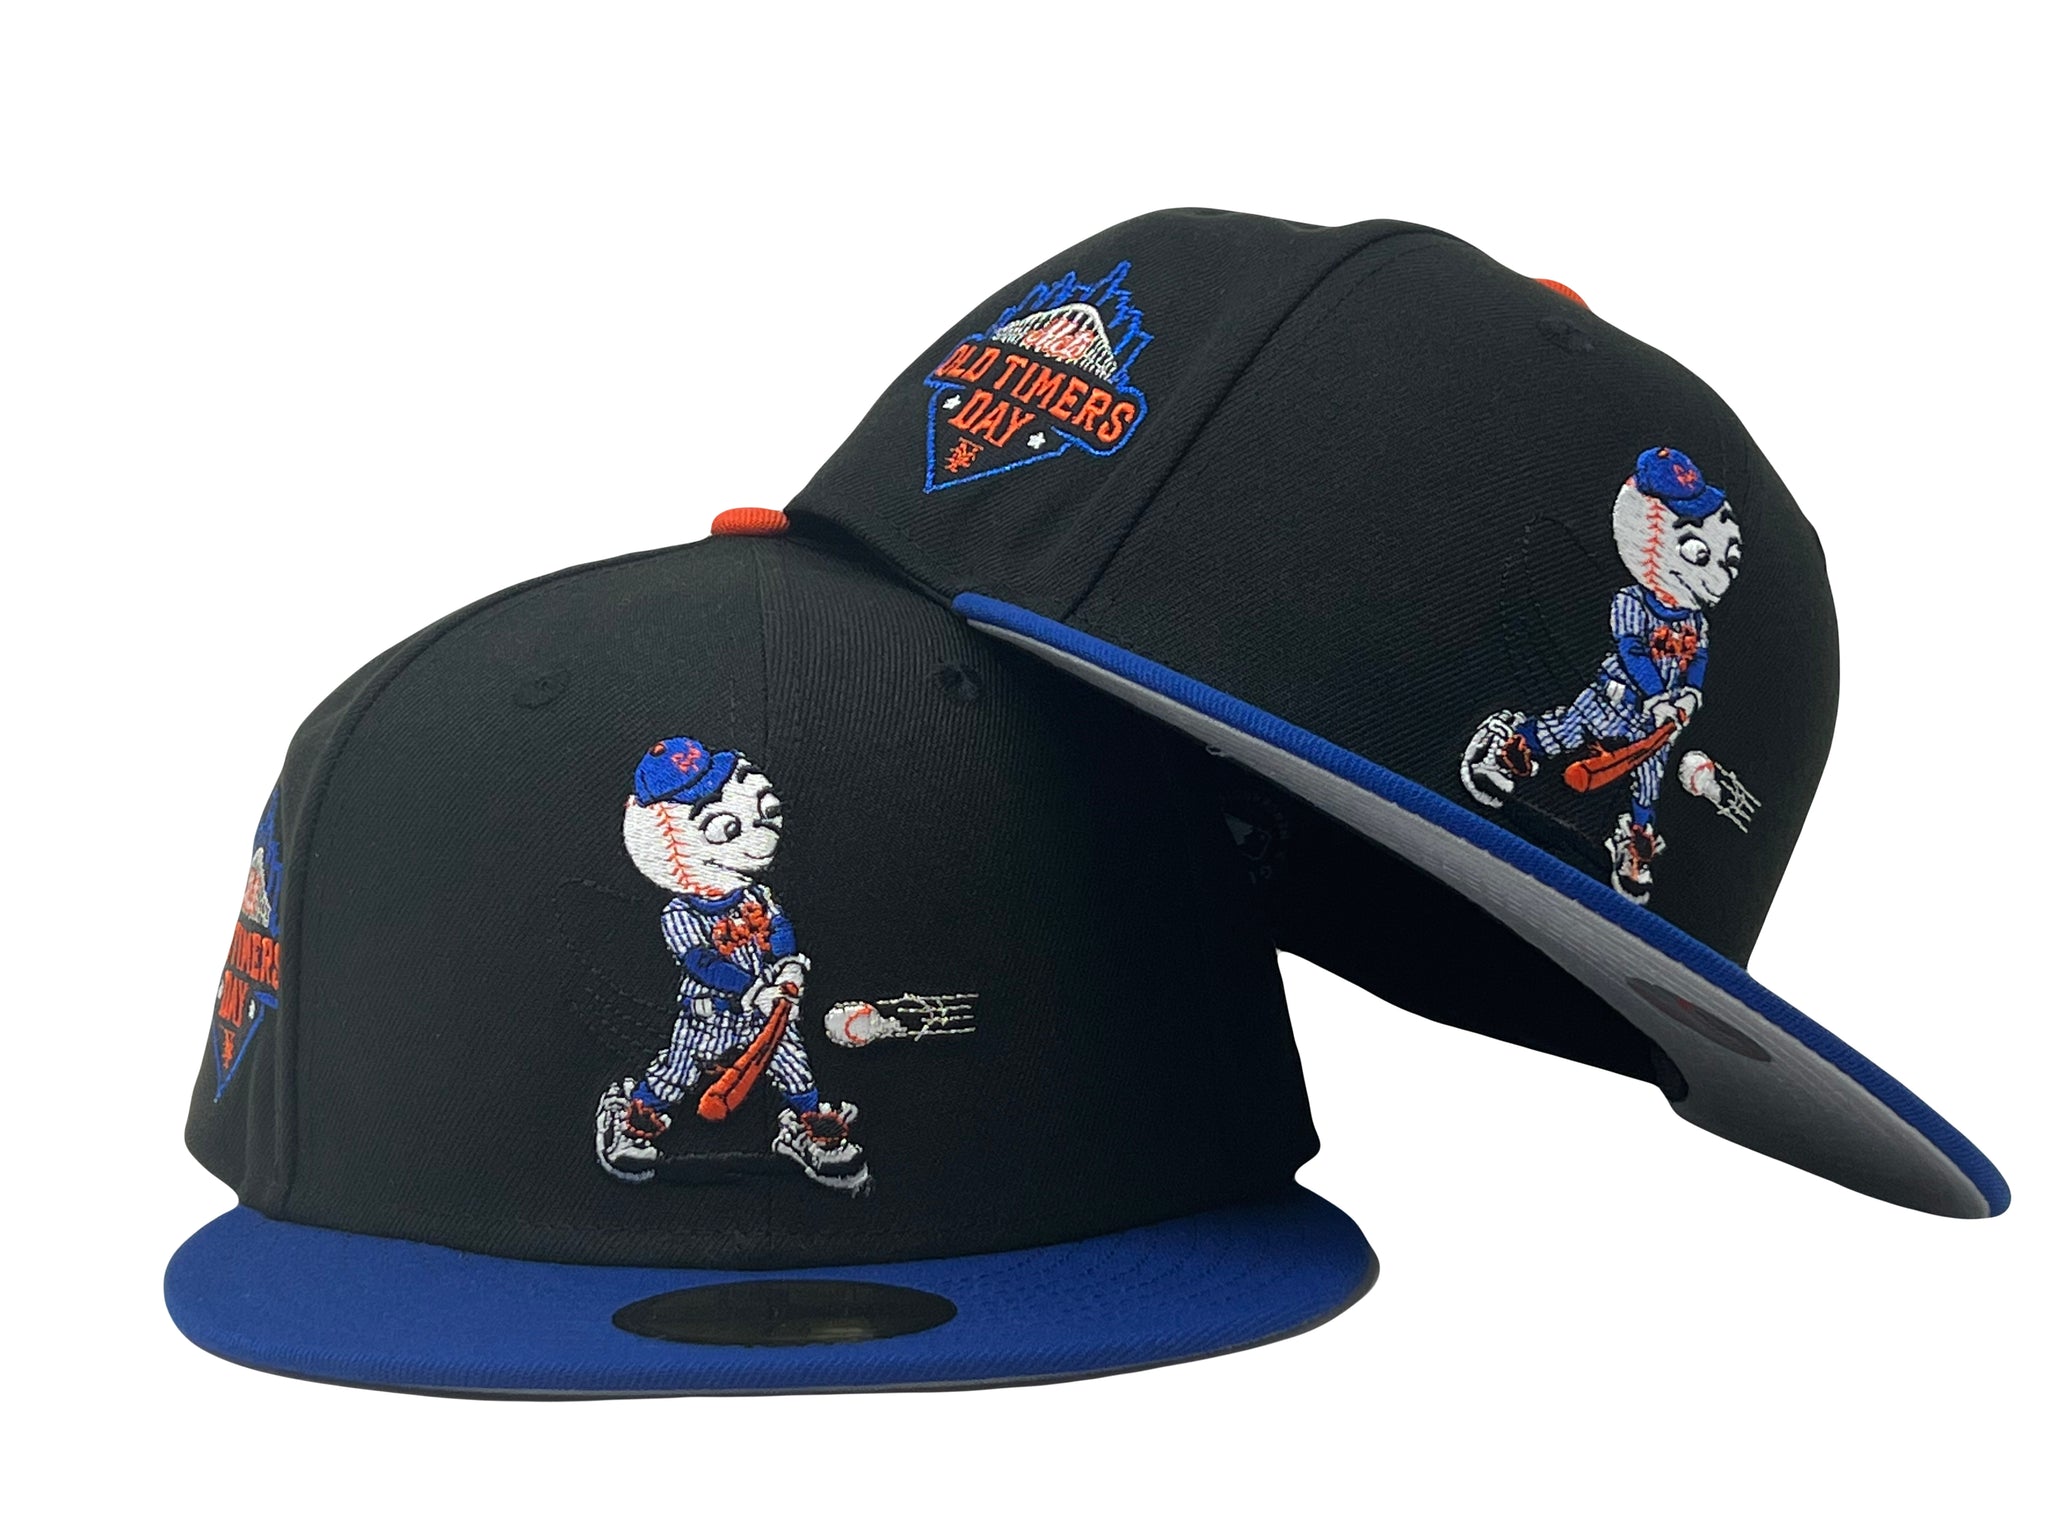 New York Mets 2023 Old Timers Day Swinging Mr. Mets Man New Era